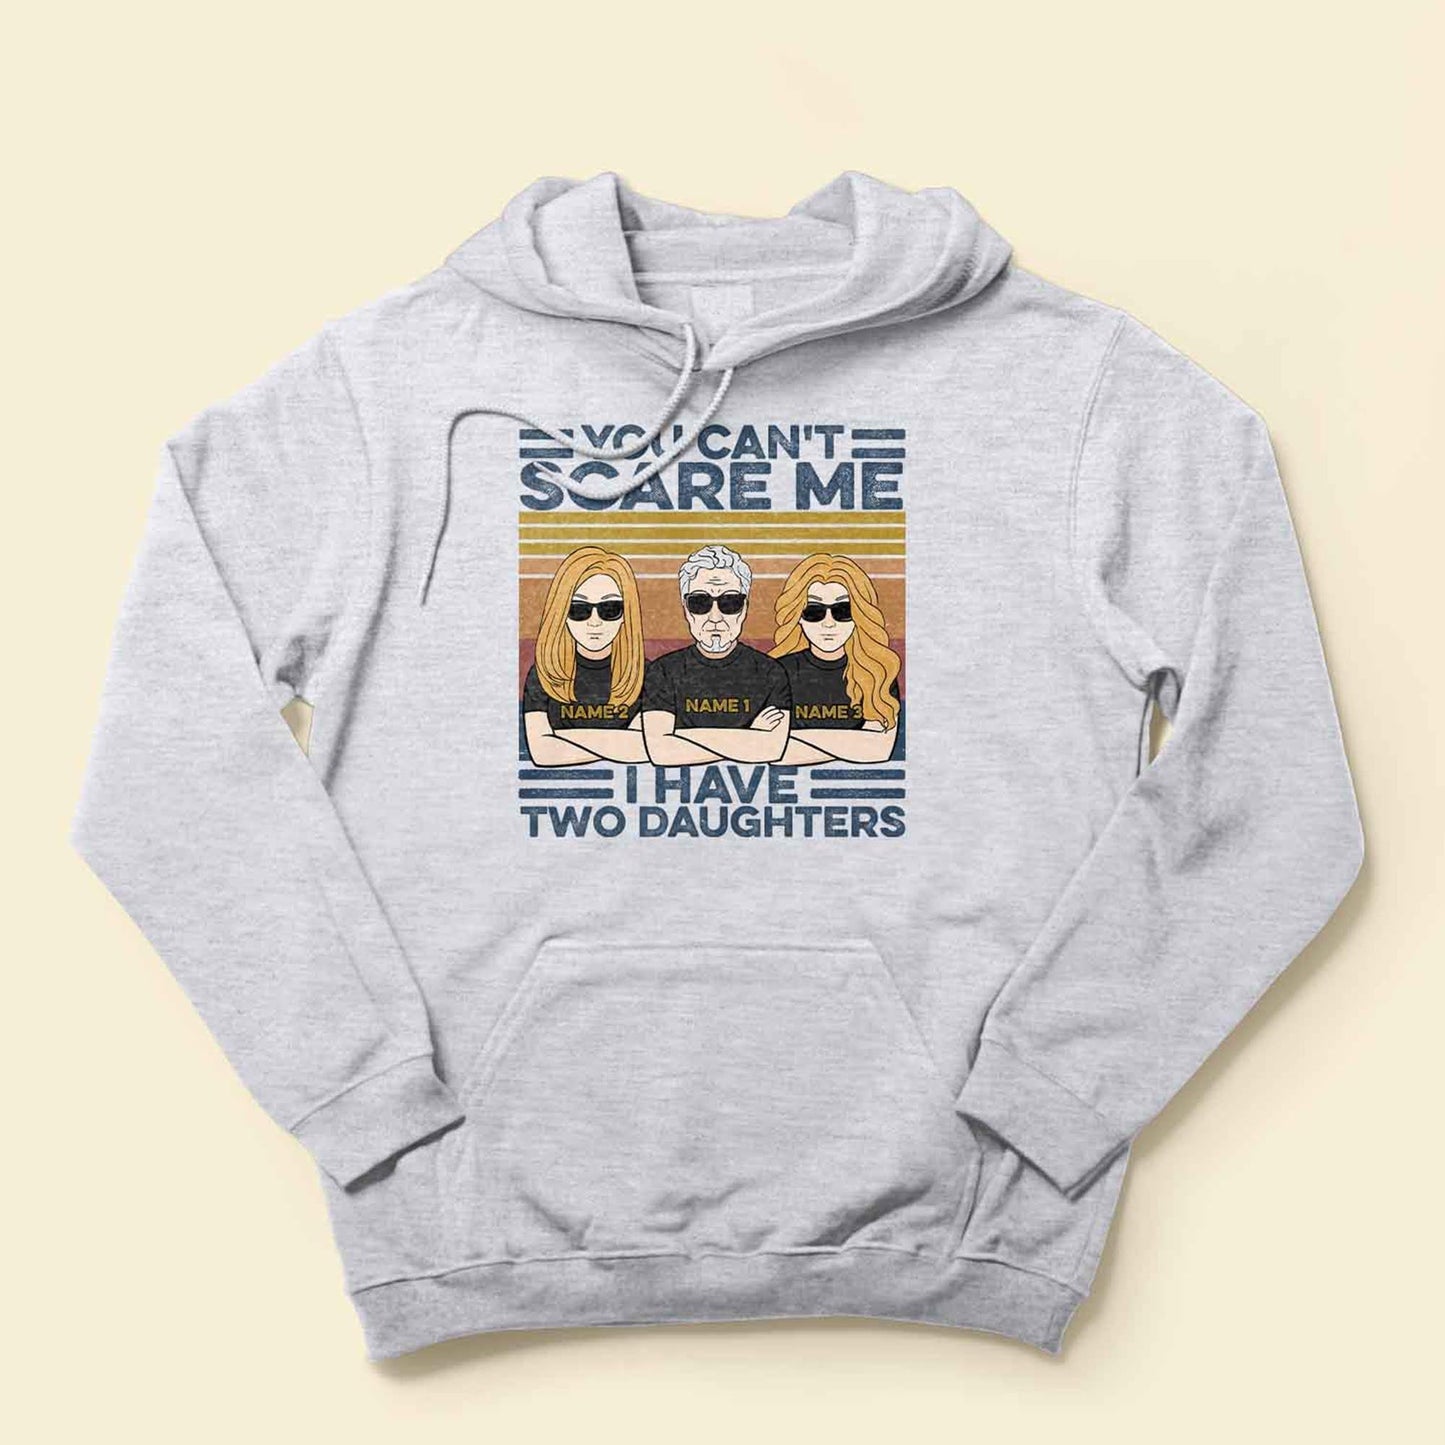 You Can't Scare Me I Have Daughters - Personalized Shirt - Father And Daughter Illustration